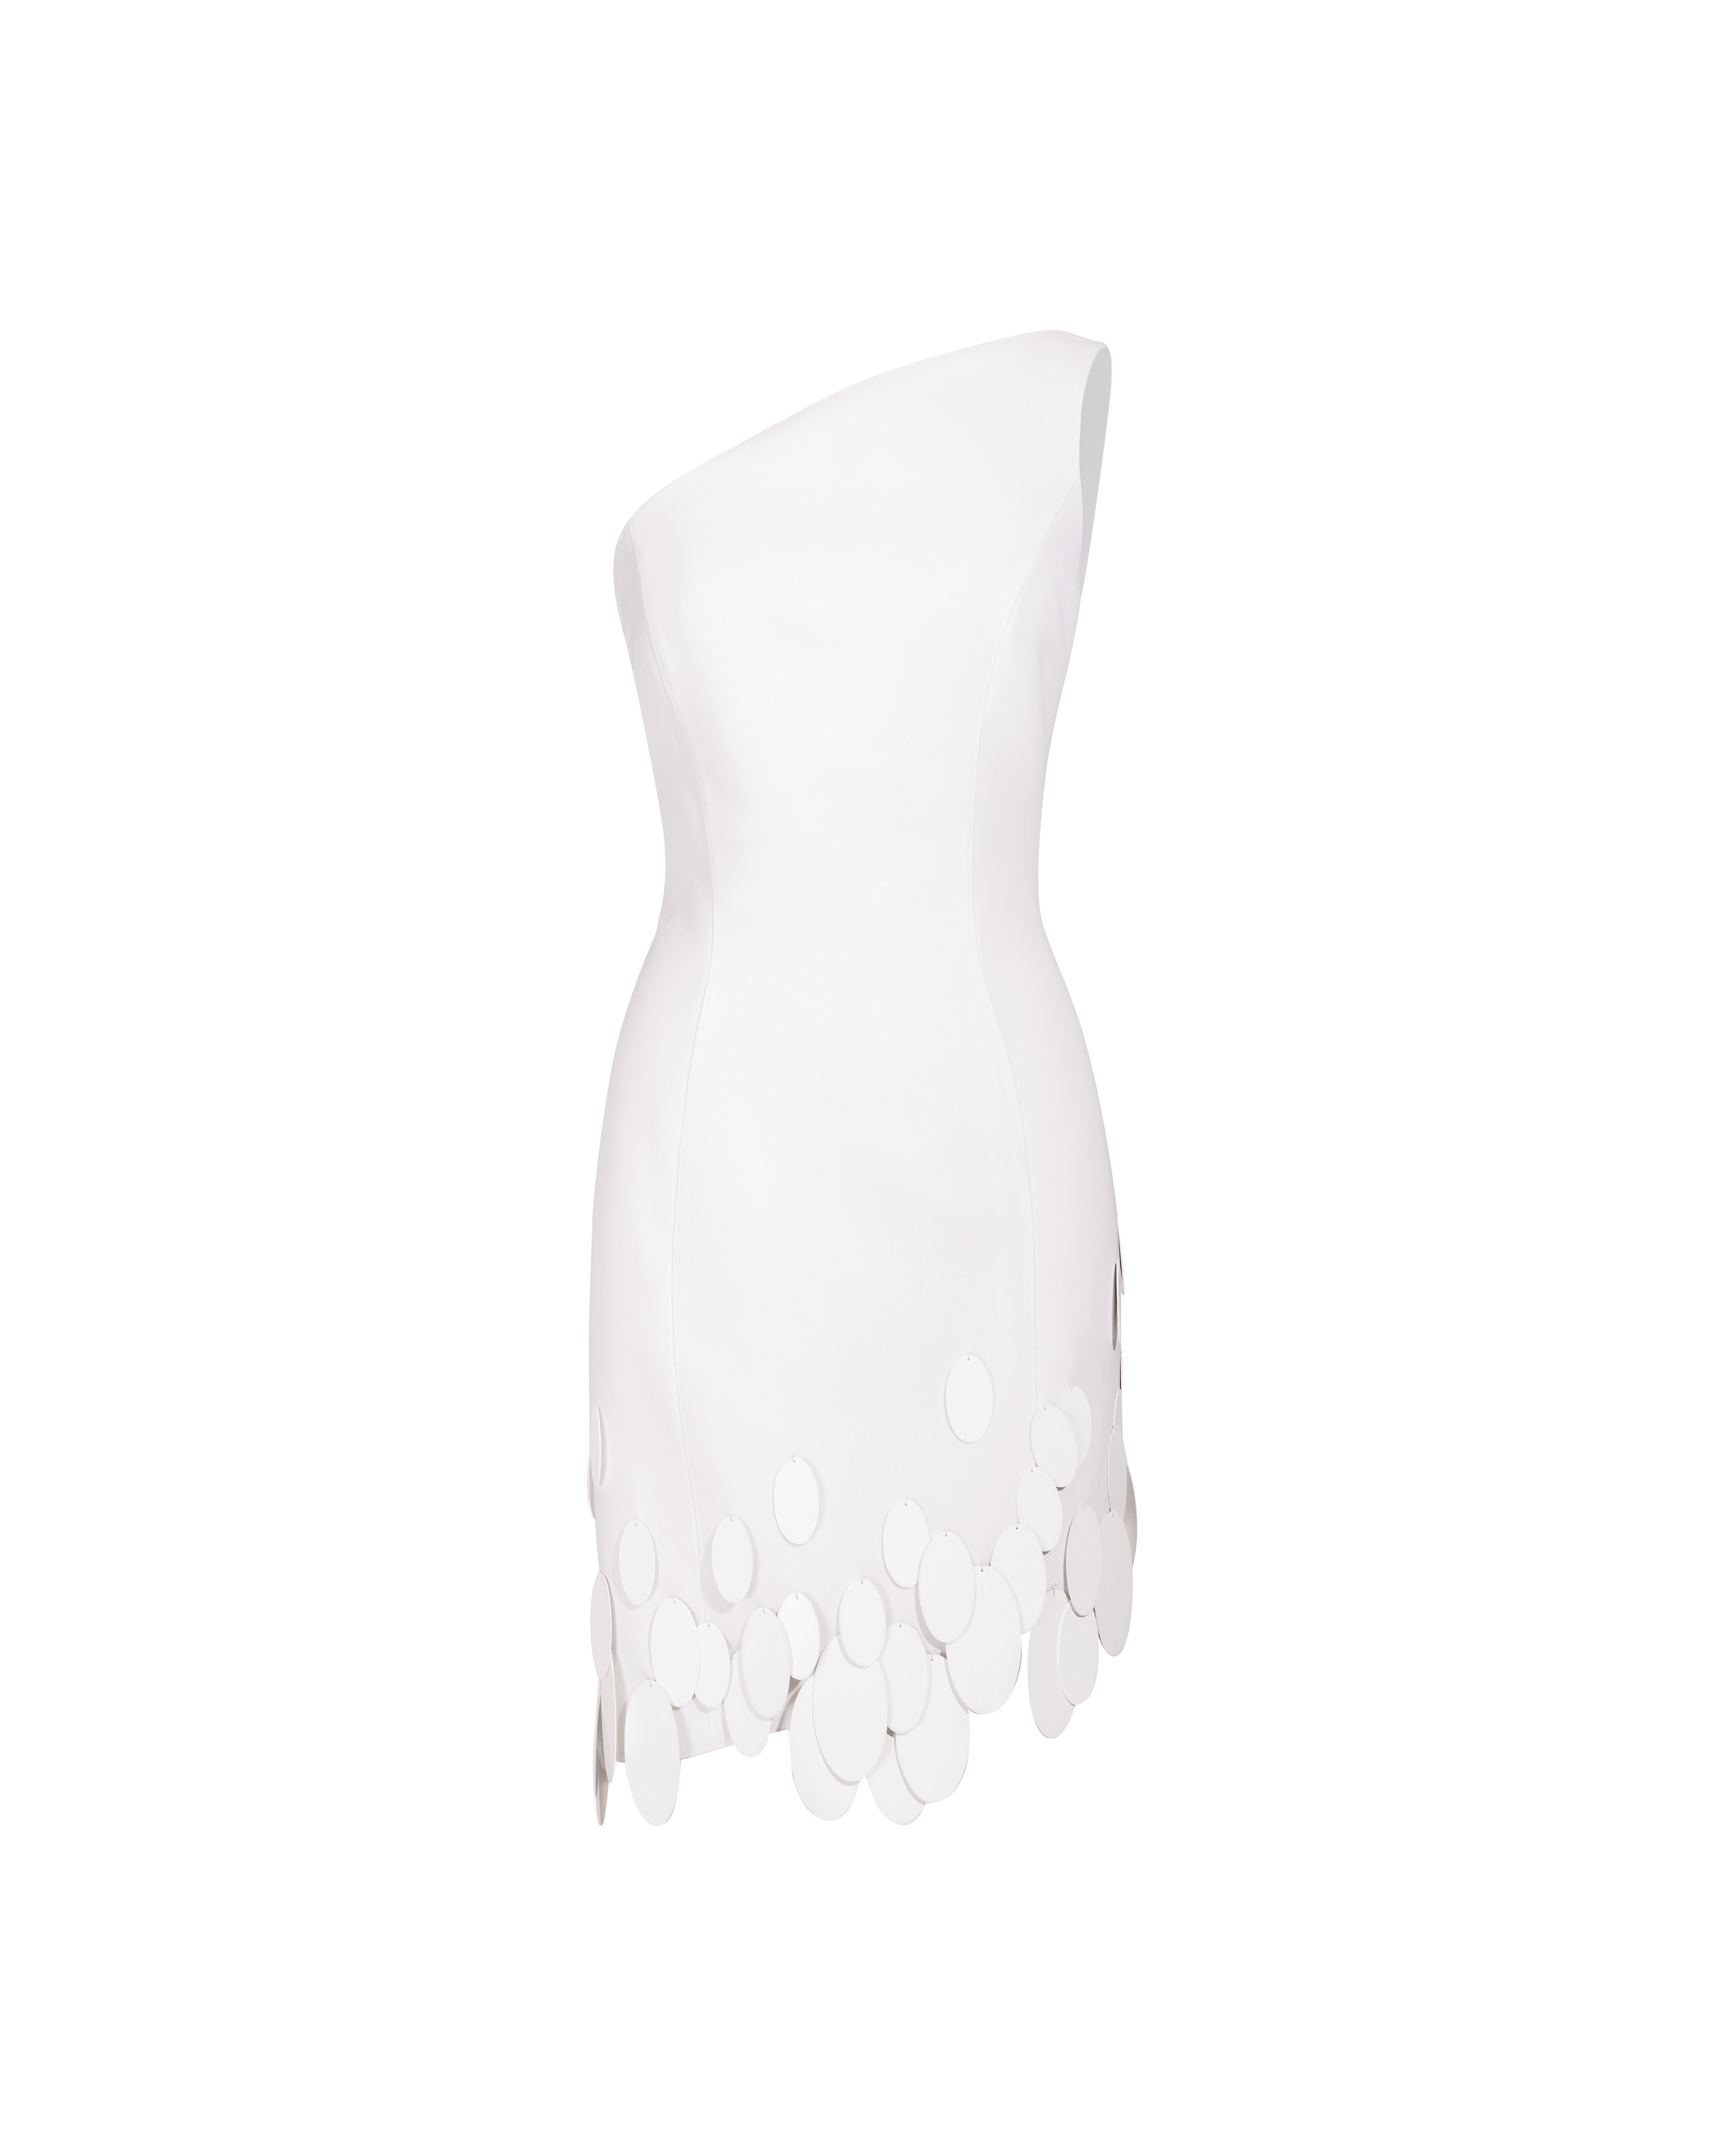 S/S 1999 Asymmetrical White Dress with Oval Paillette 'Fringe'